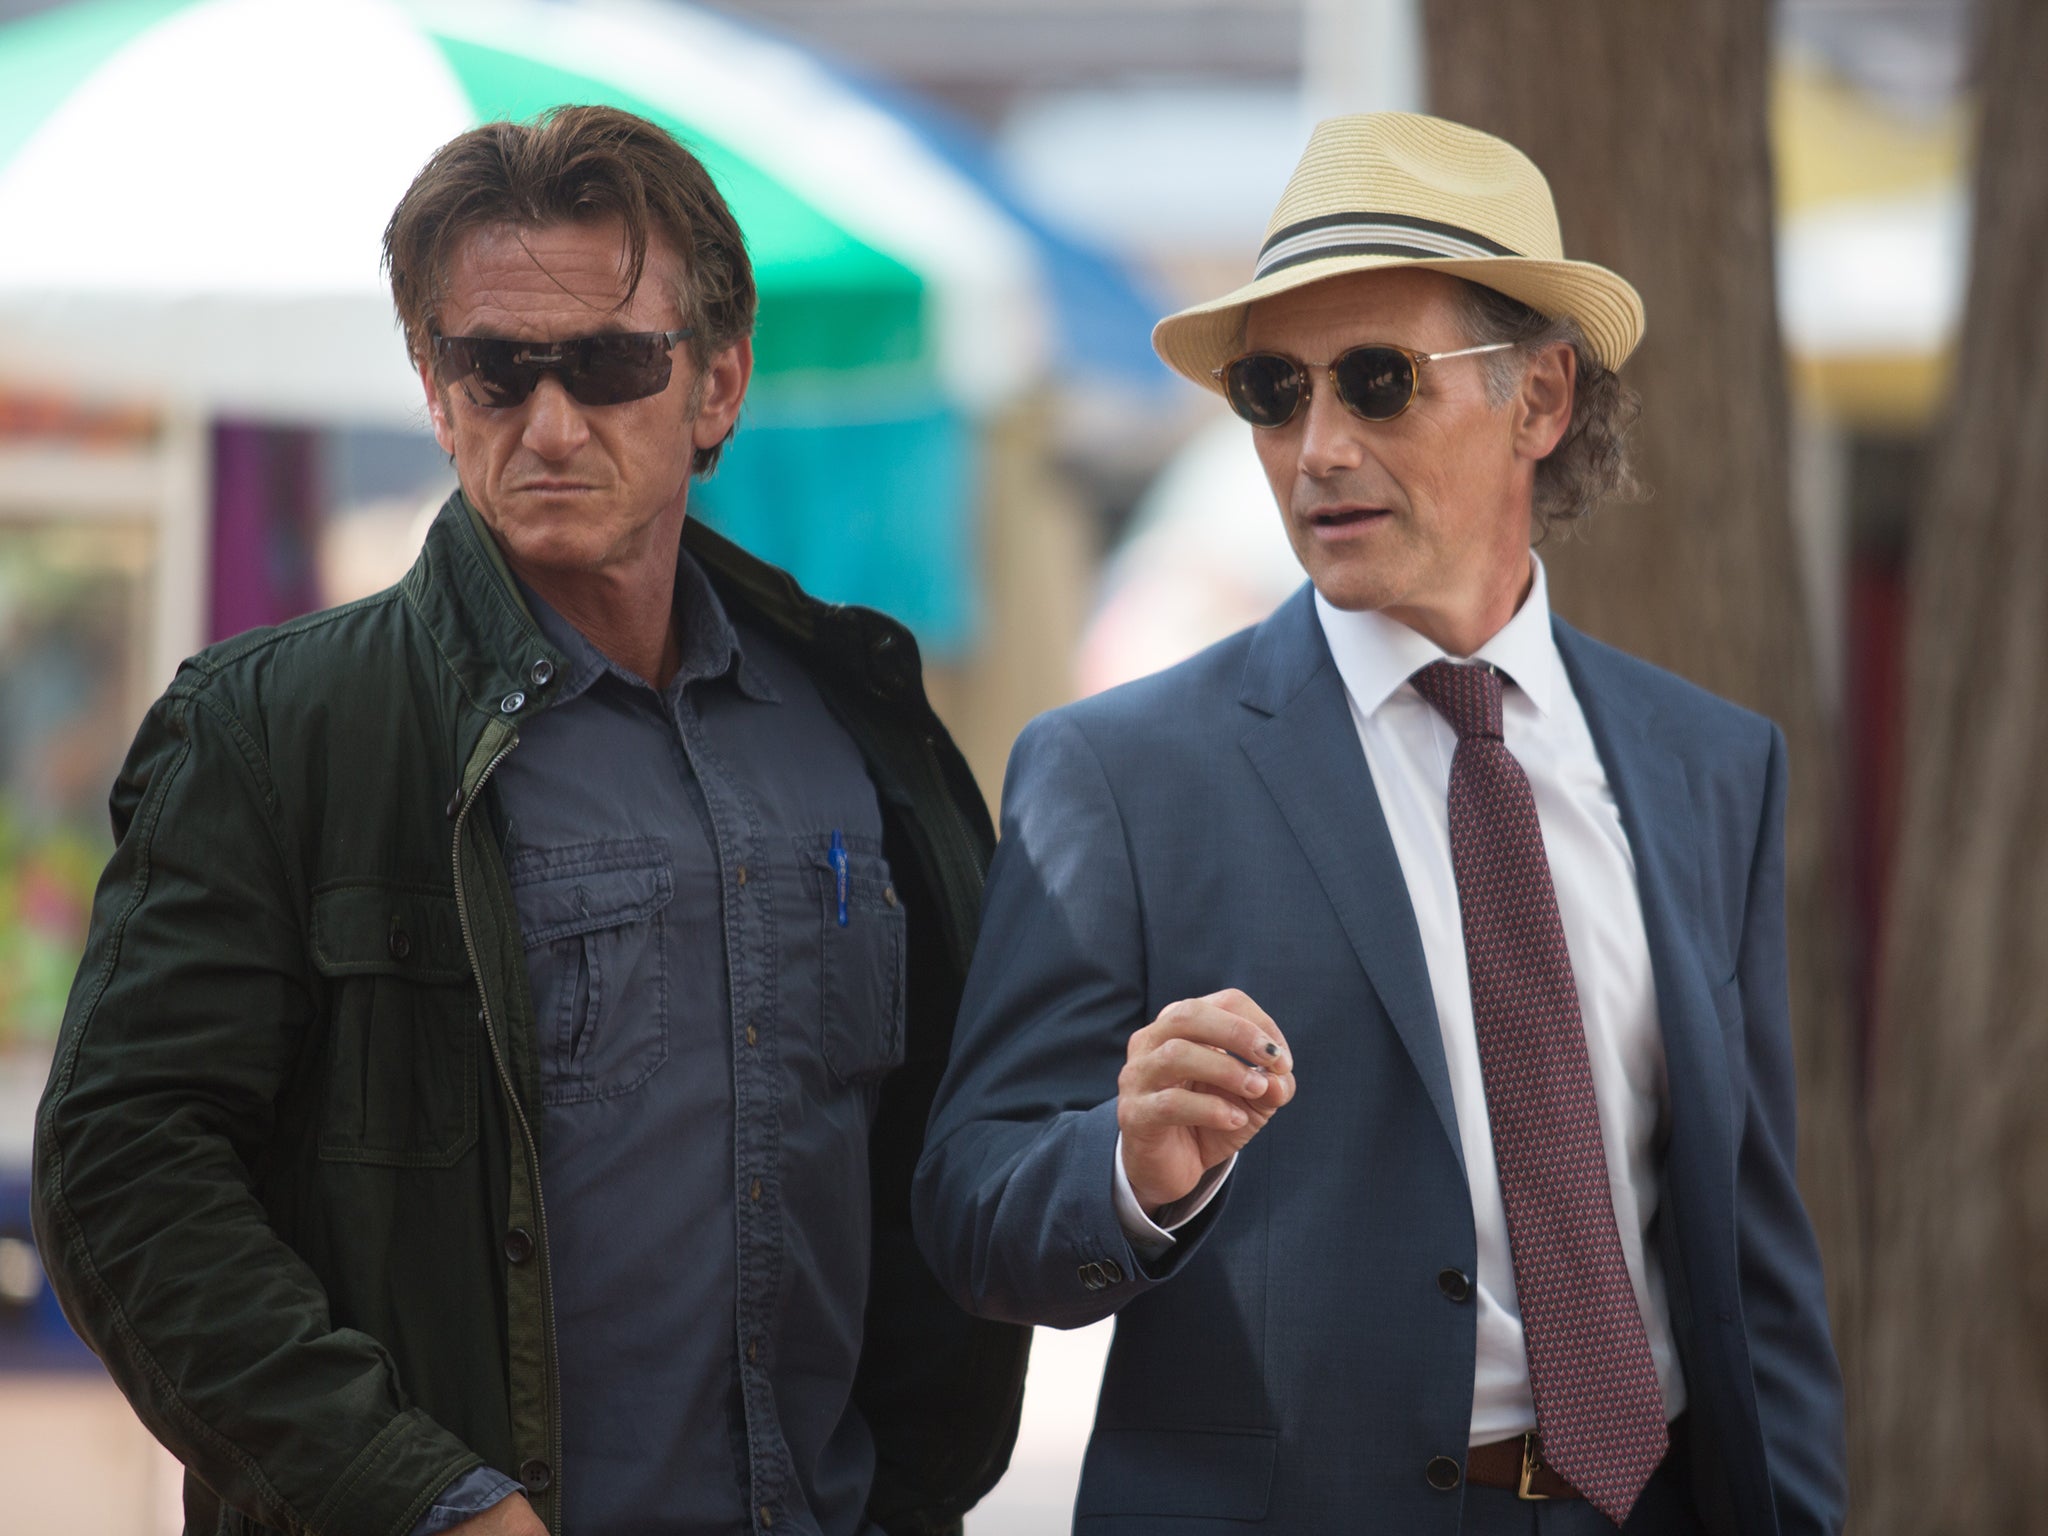 A cut above: Sean Penn is outclassed by Mark Rylance
in ‘The Gunman’